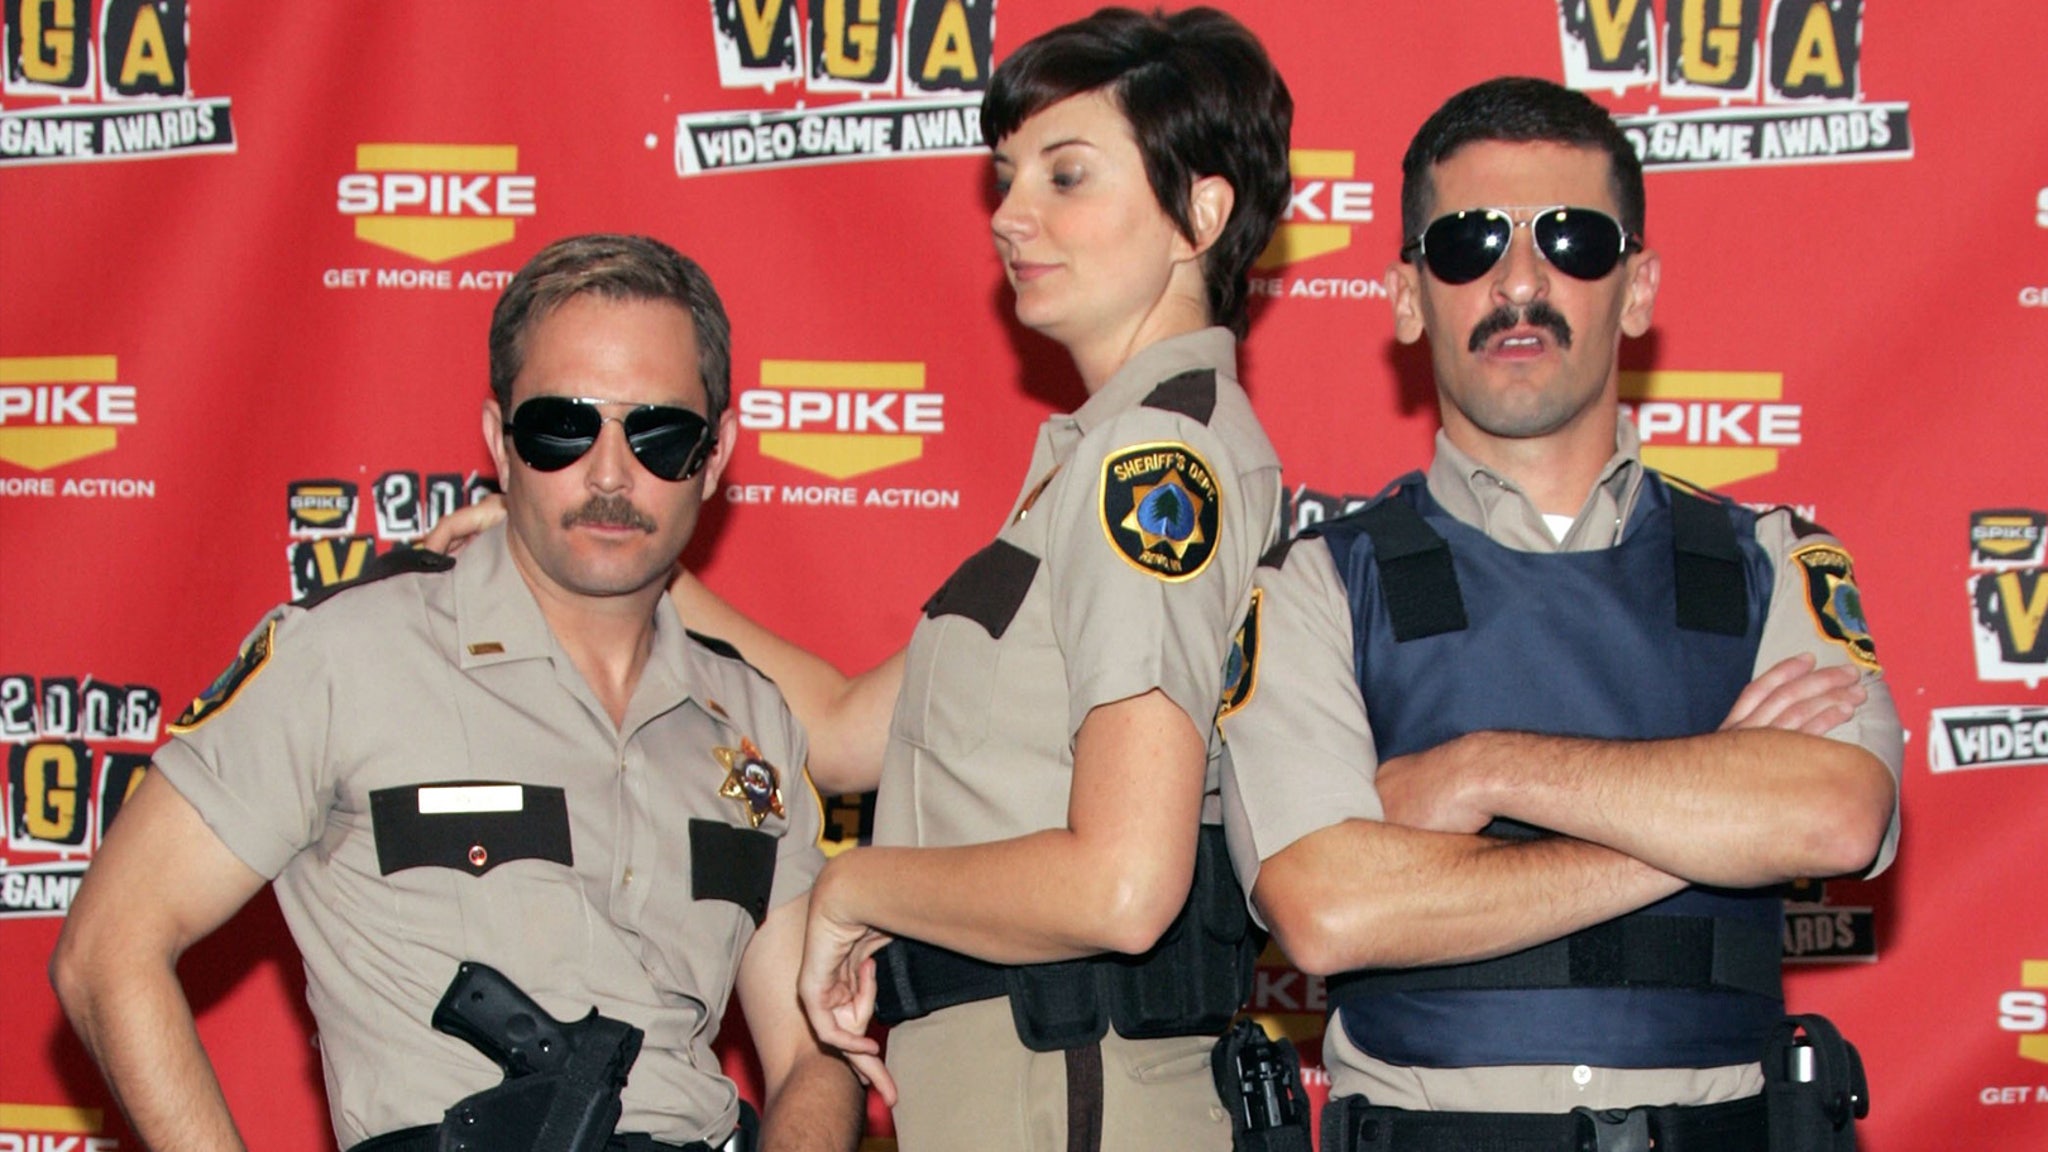 Reno 911! Lands Another Season with Revival on Mobile Platform Quibi